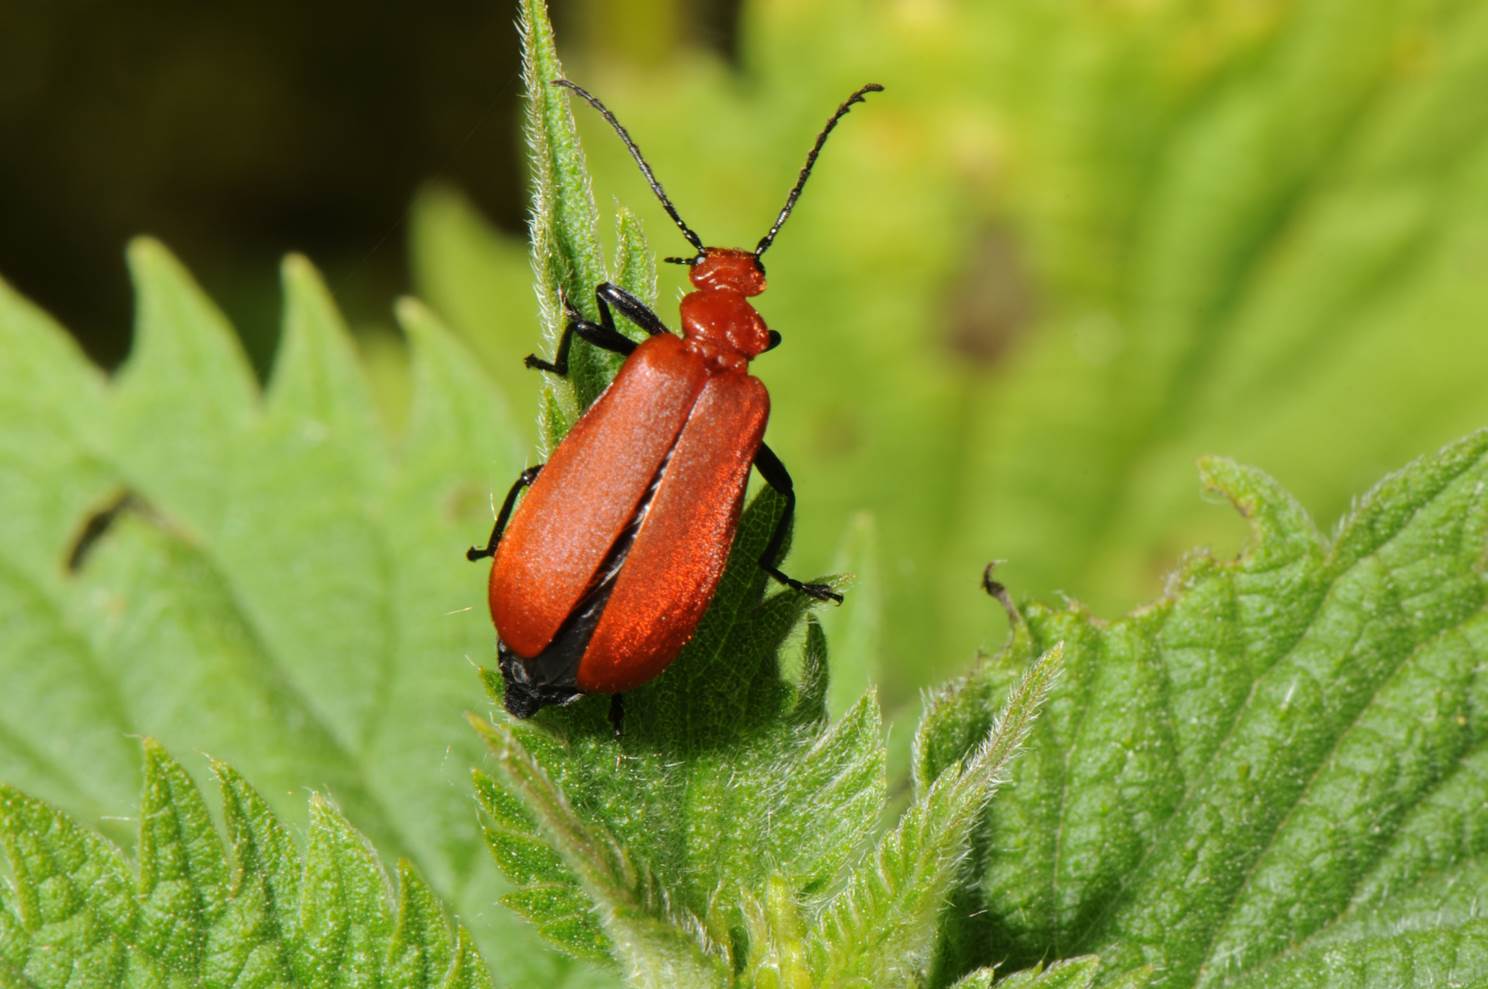 A red and black bug on a leaf

Description automatically generated with low confidence